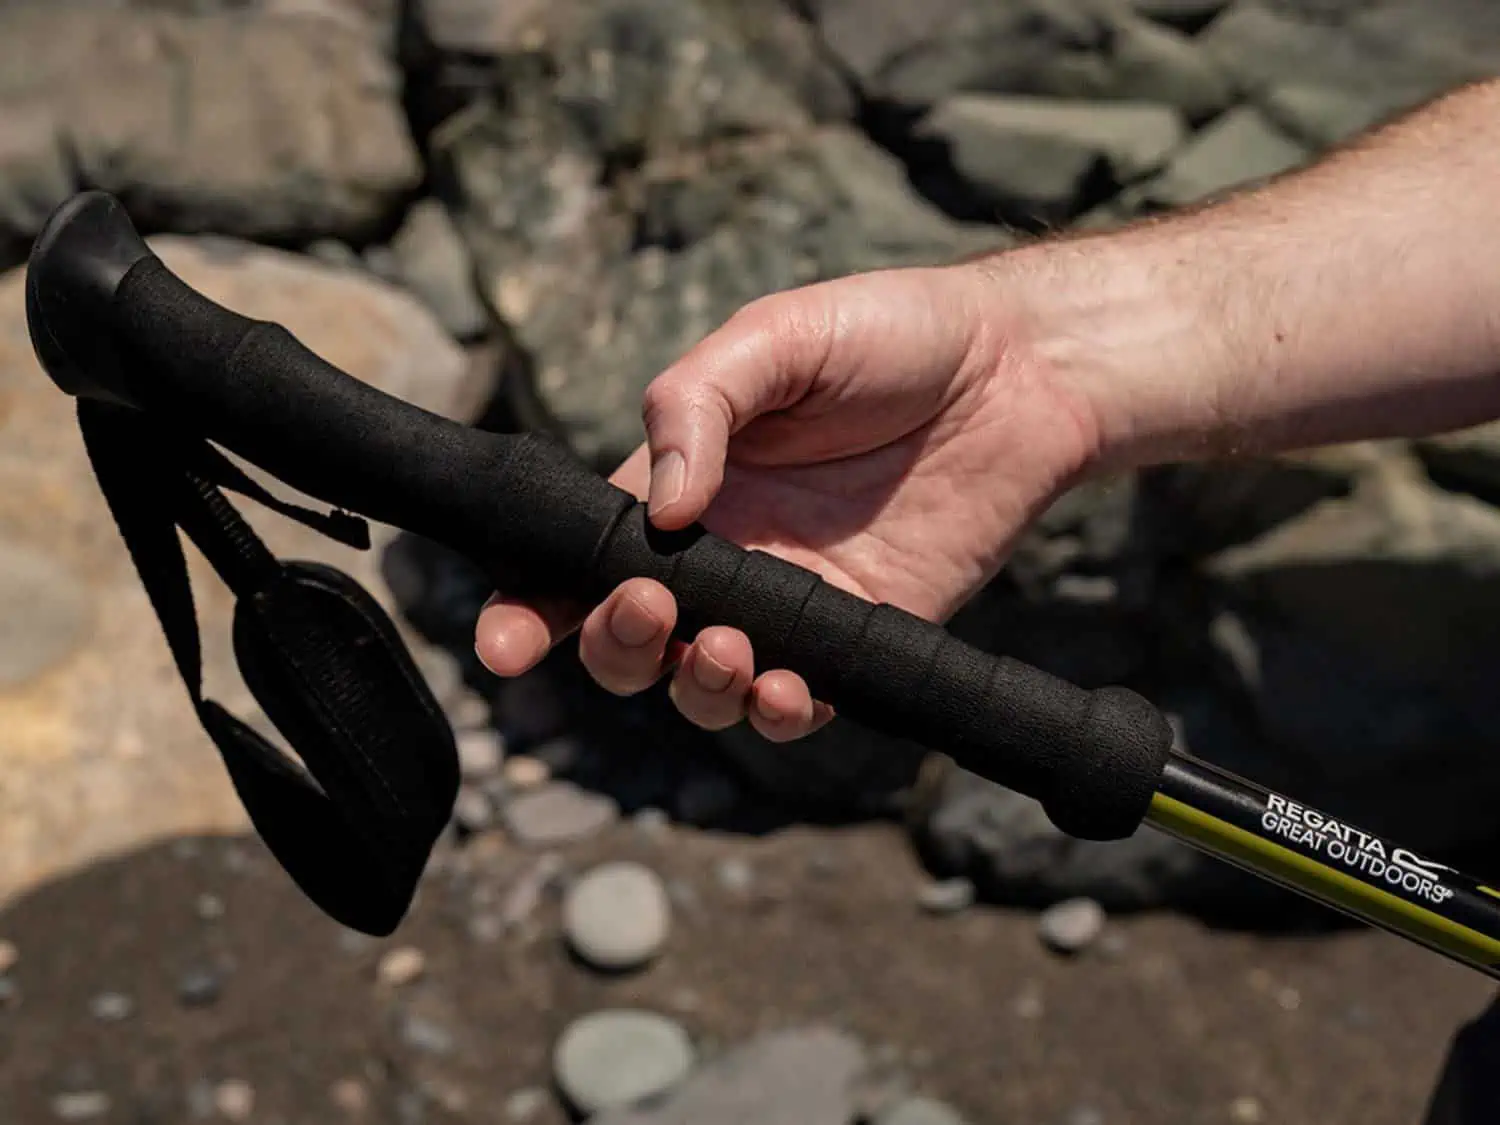 showing the grip and comfort of the Regatta Ultralight walking pole